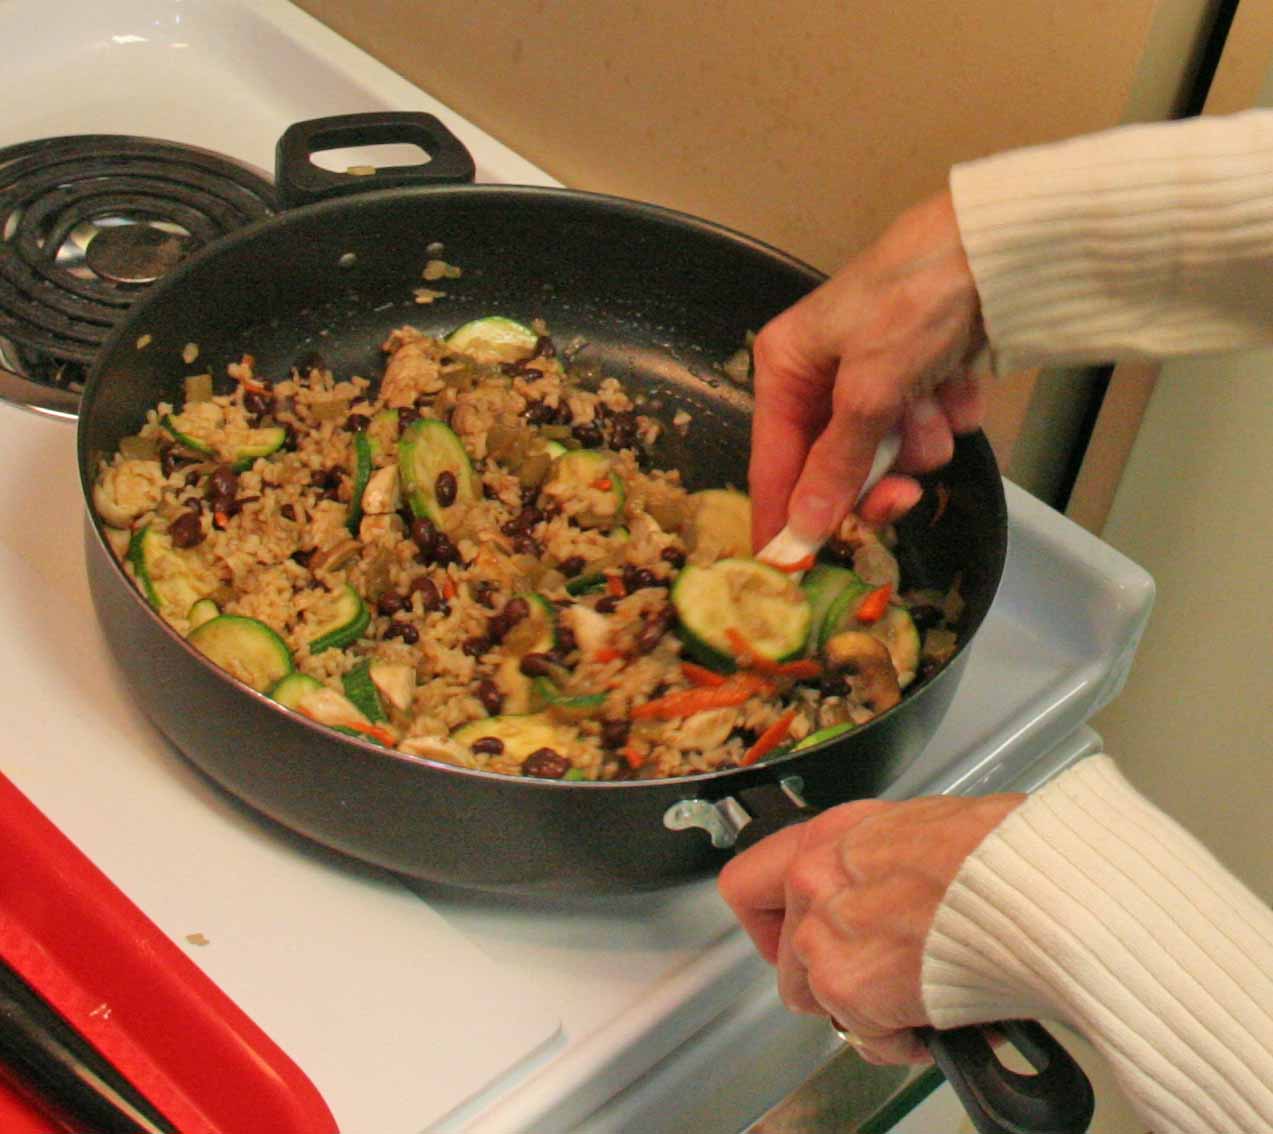 UGA Cooperative Extension has great ideas on how to prepare healthy, family-pleasing meals on a budget and is offering a cooking class for busy families July 18 at Rock Eagle 4-H Center.